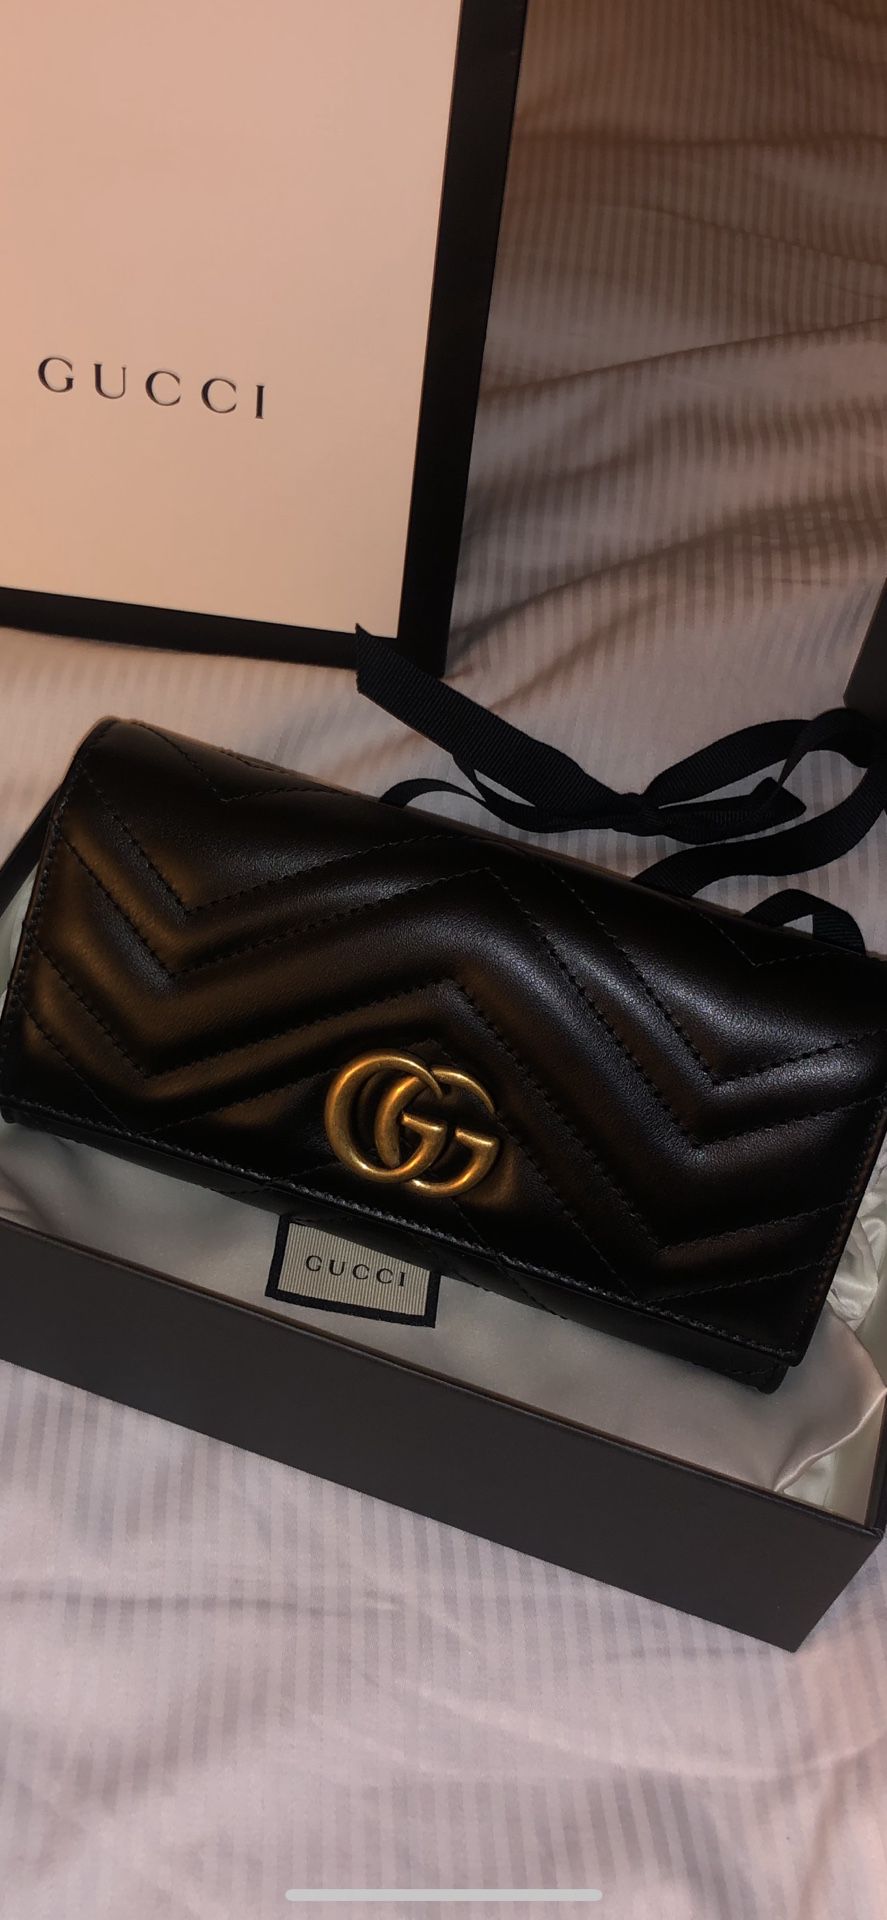 NEW Gucci Marmont Black wallet